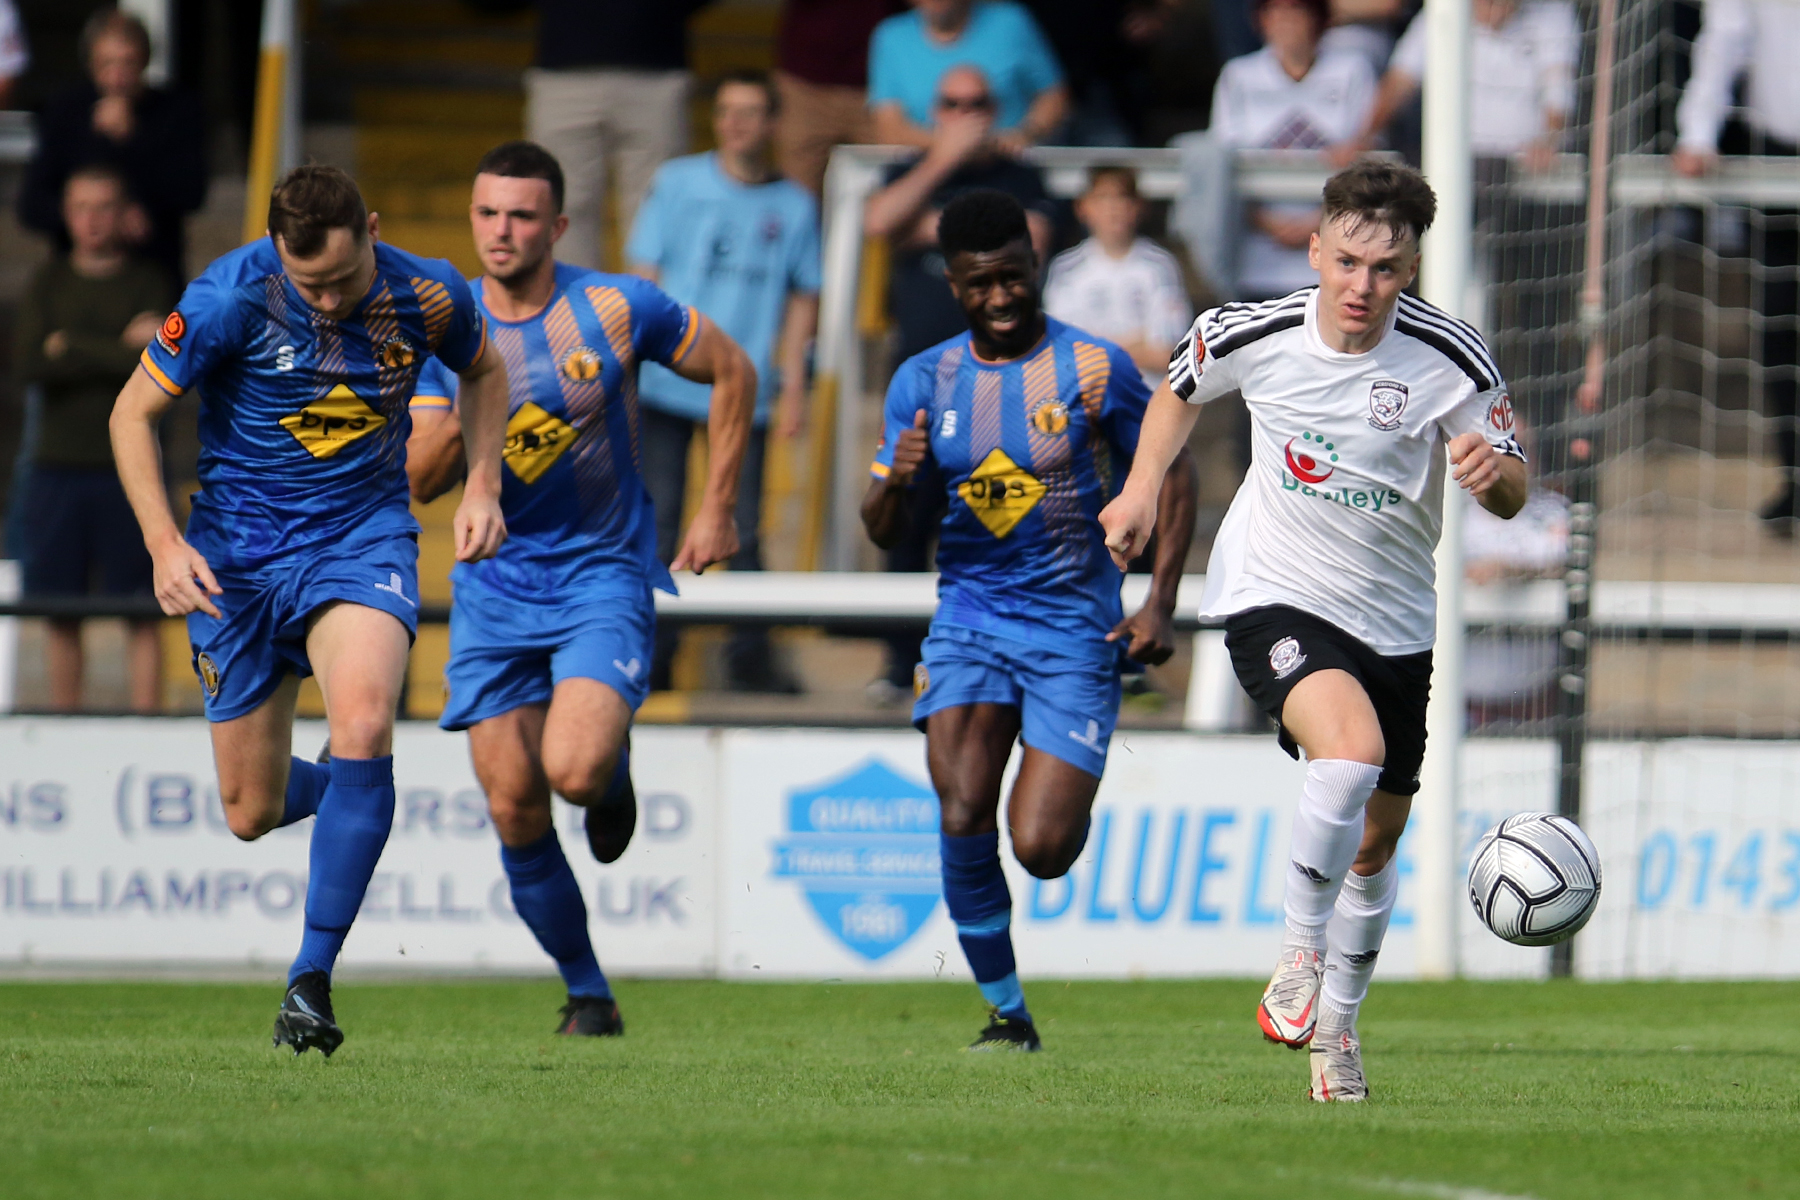 FOOTBALL | Hereford FC take on Solihull Moors with place in FA Cup 1st Round Proper the award for the winners